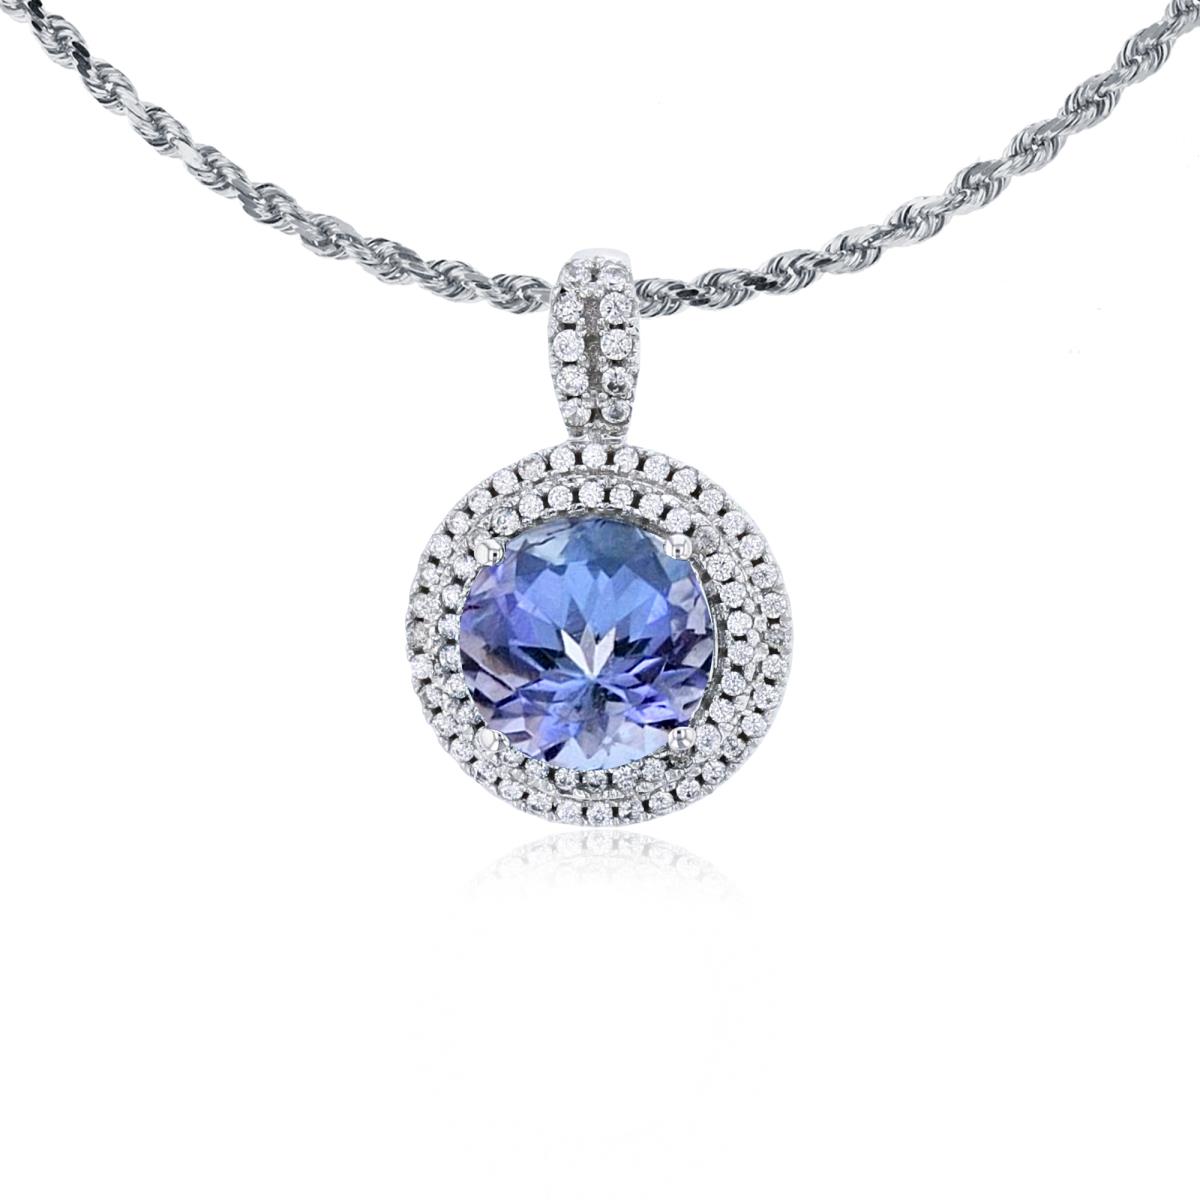 10K White Gold 7mm Round Tanzanite & 0.25 CTTW Diamonds Double Halo 18" Rope Chain Necklace